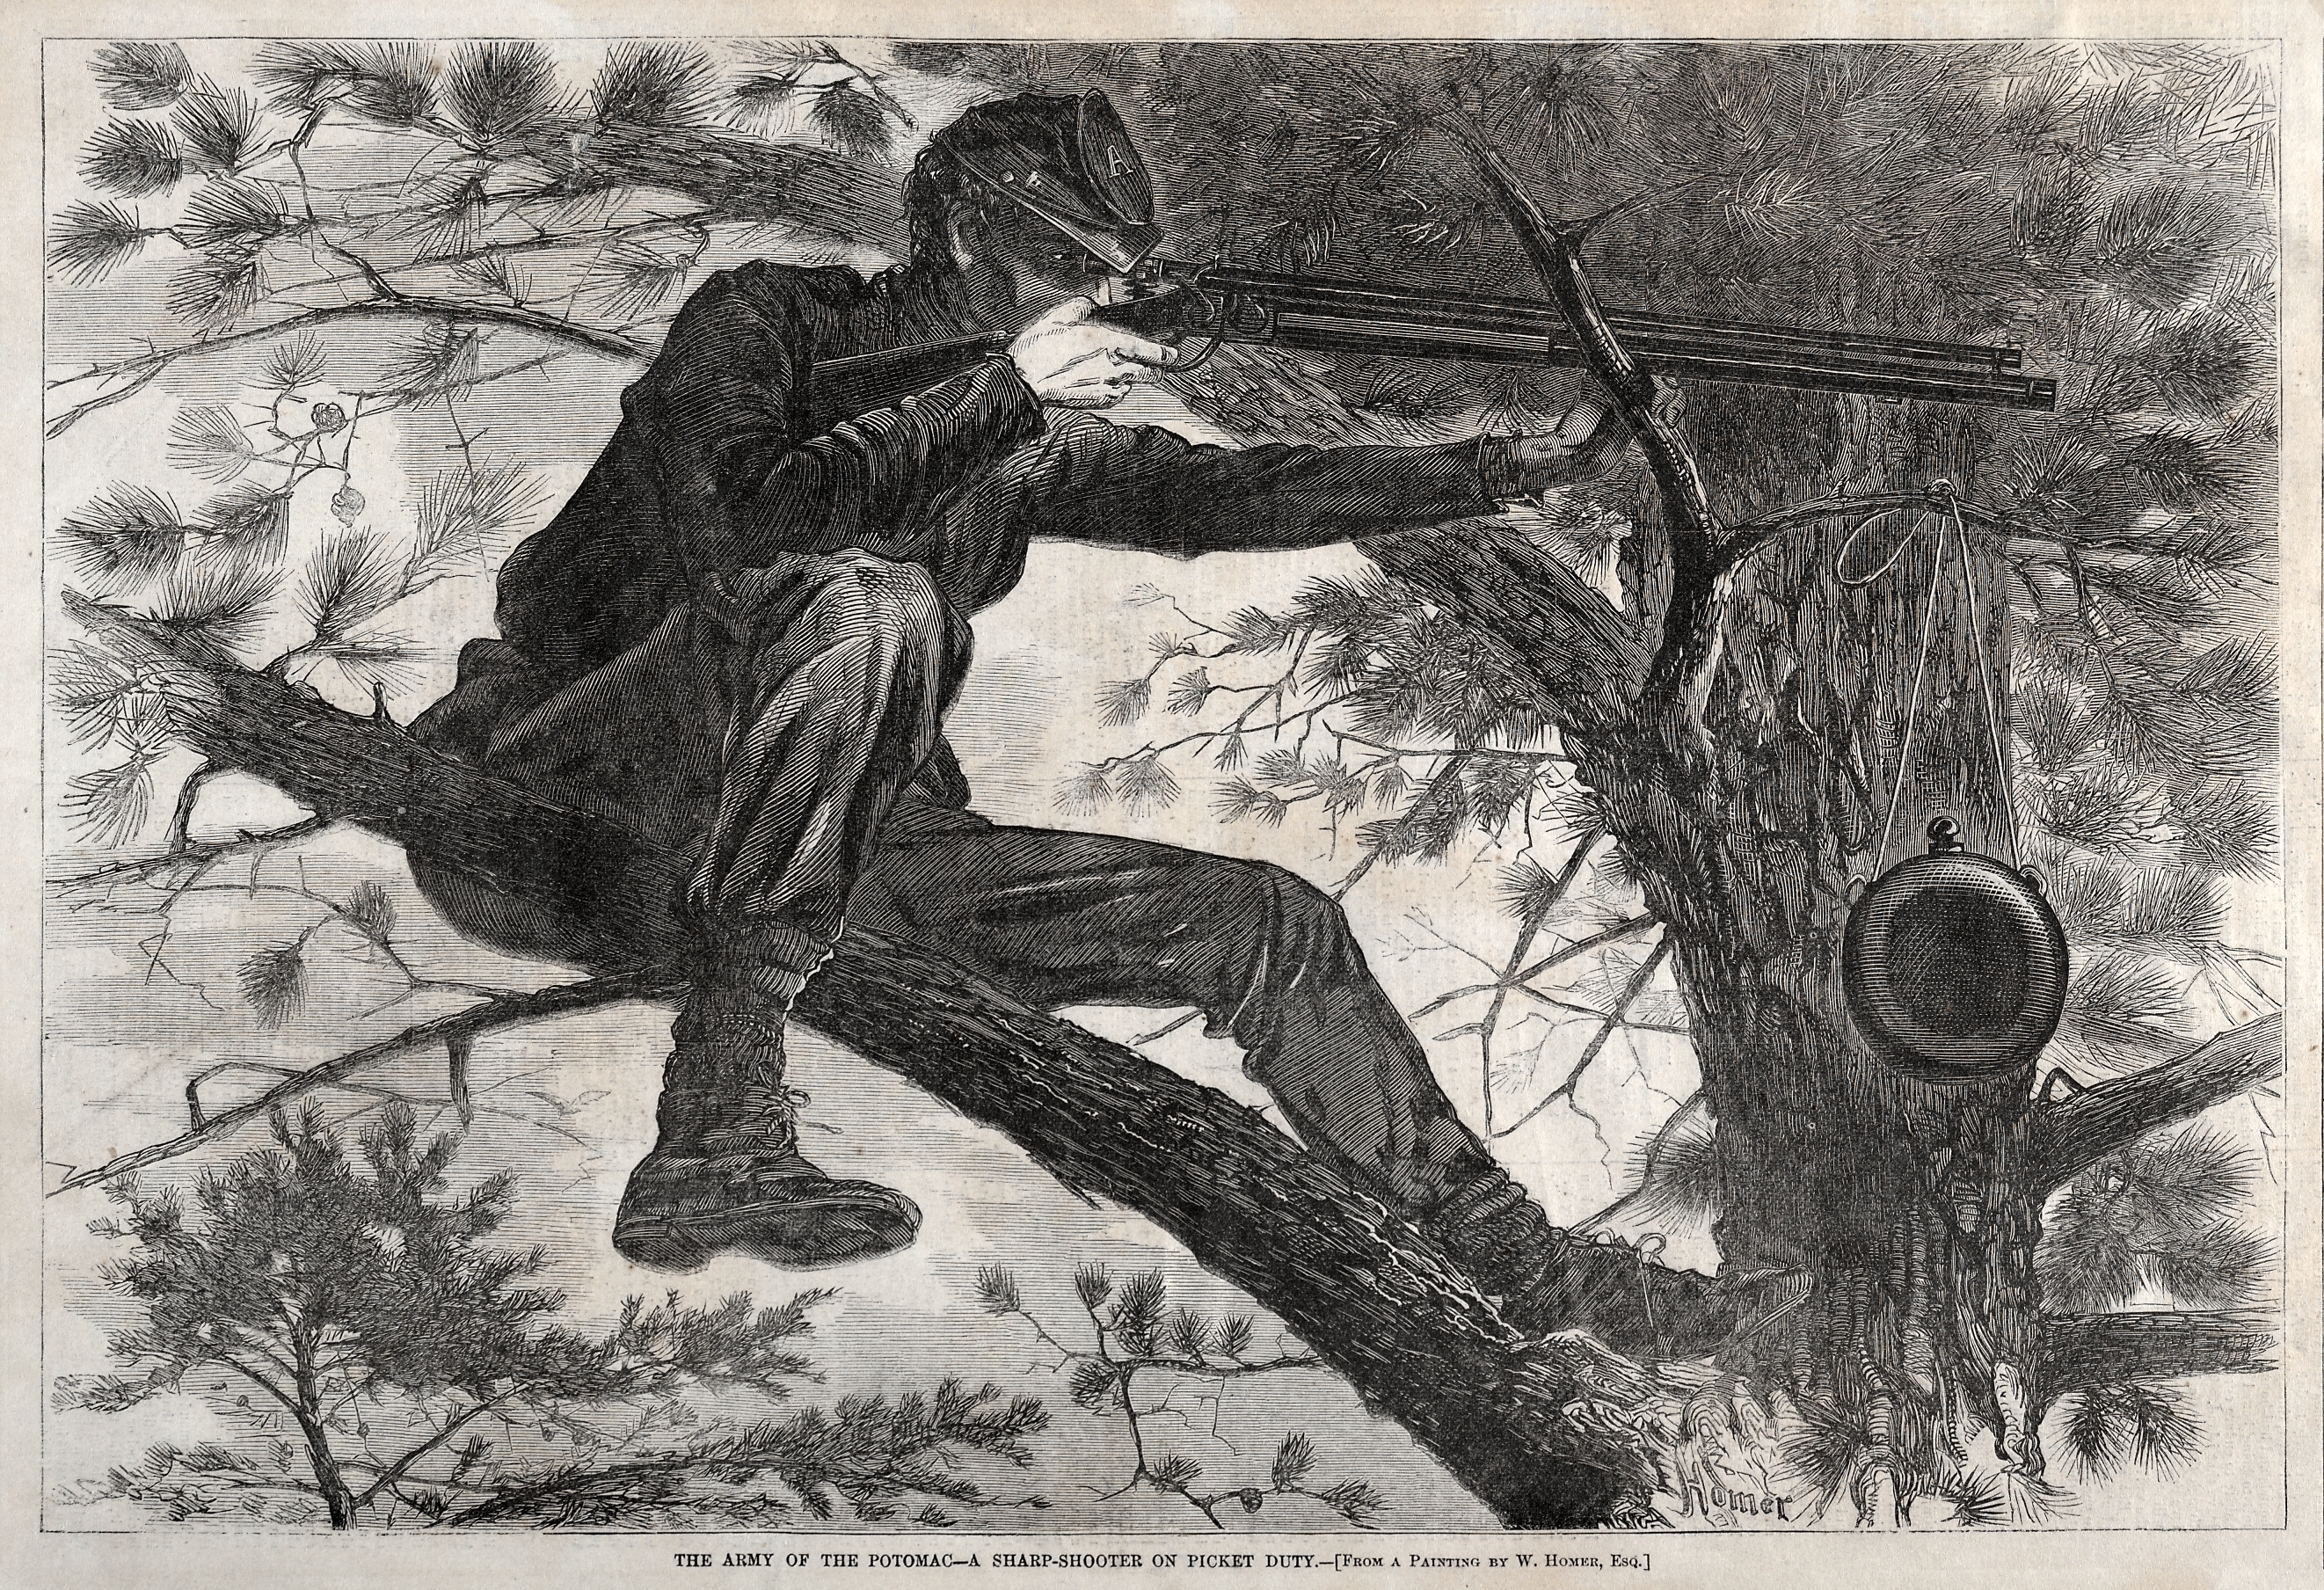 The Army of the Potomac - A Sharpshooter on Picket Duty